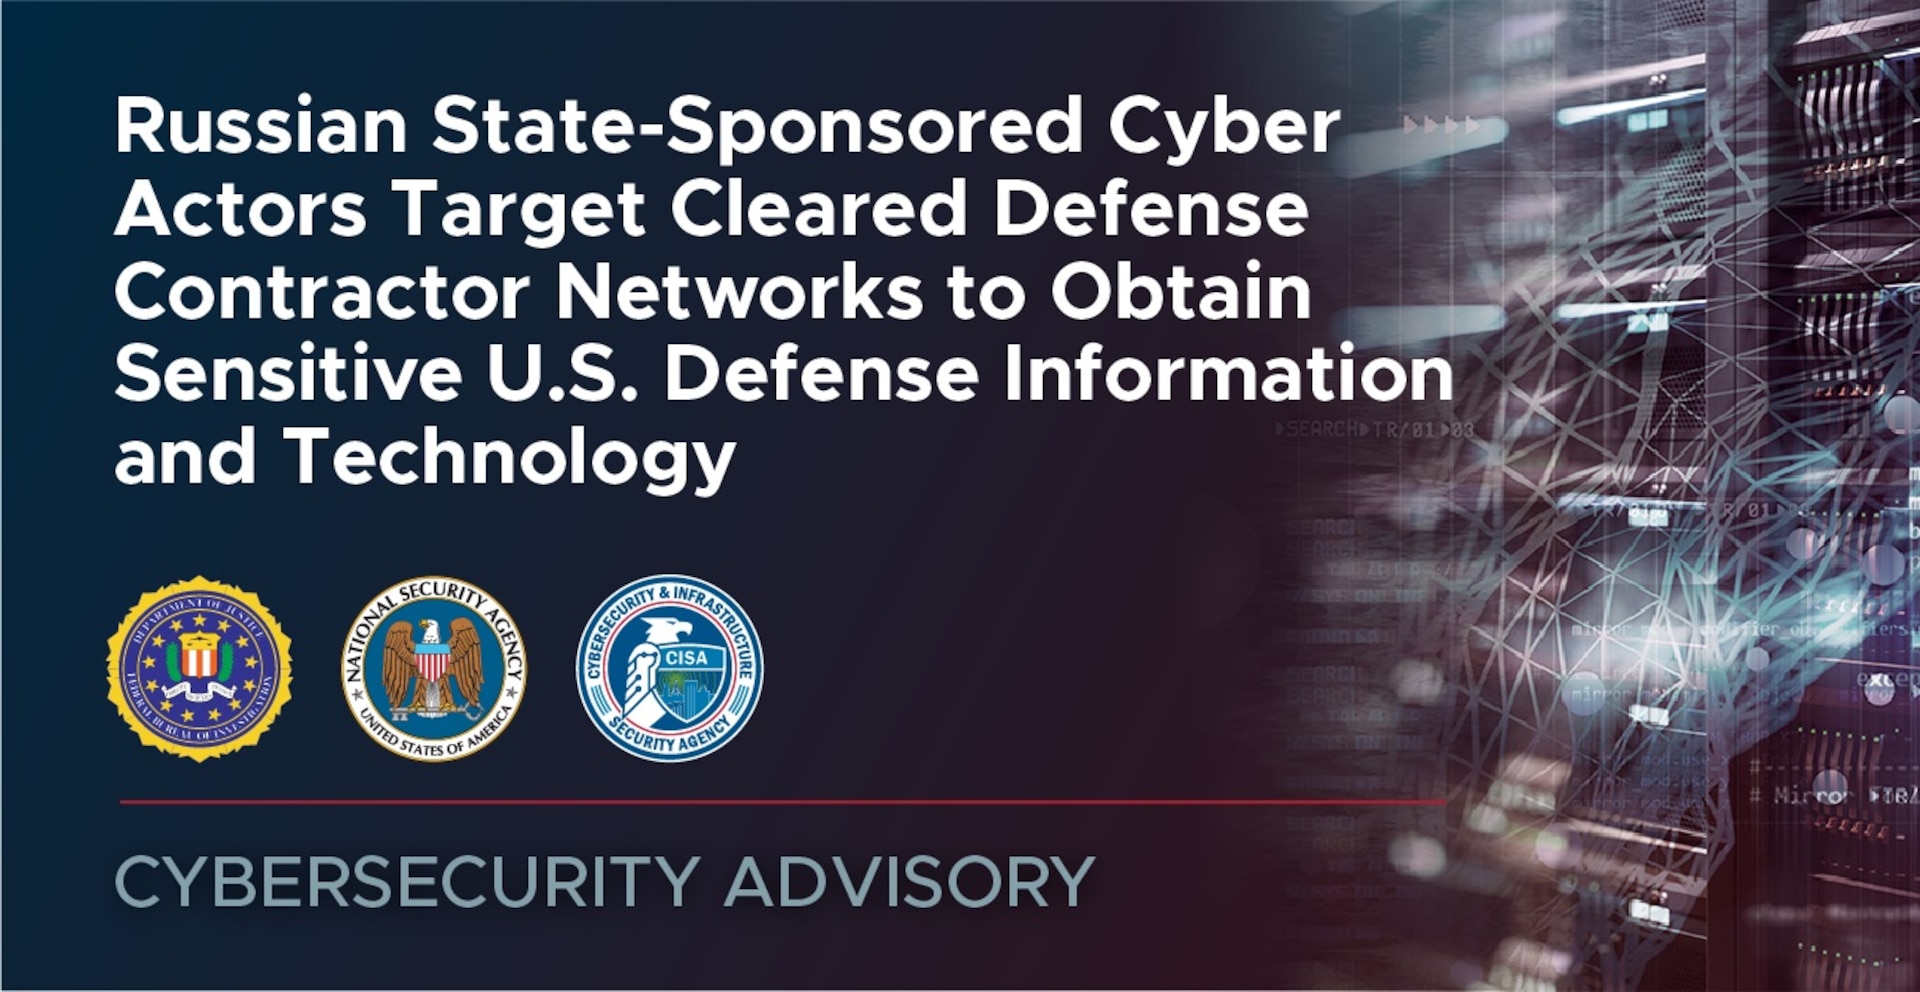 CSA: Russian State-Sponsored Cyber Actors Target Cleared Defense Contractor Networks to Obtain Sensitive U.S. Defense Information and Technology